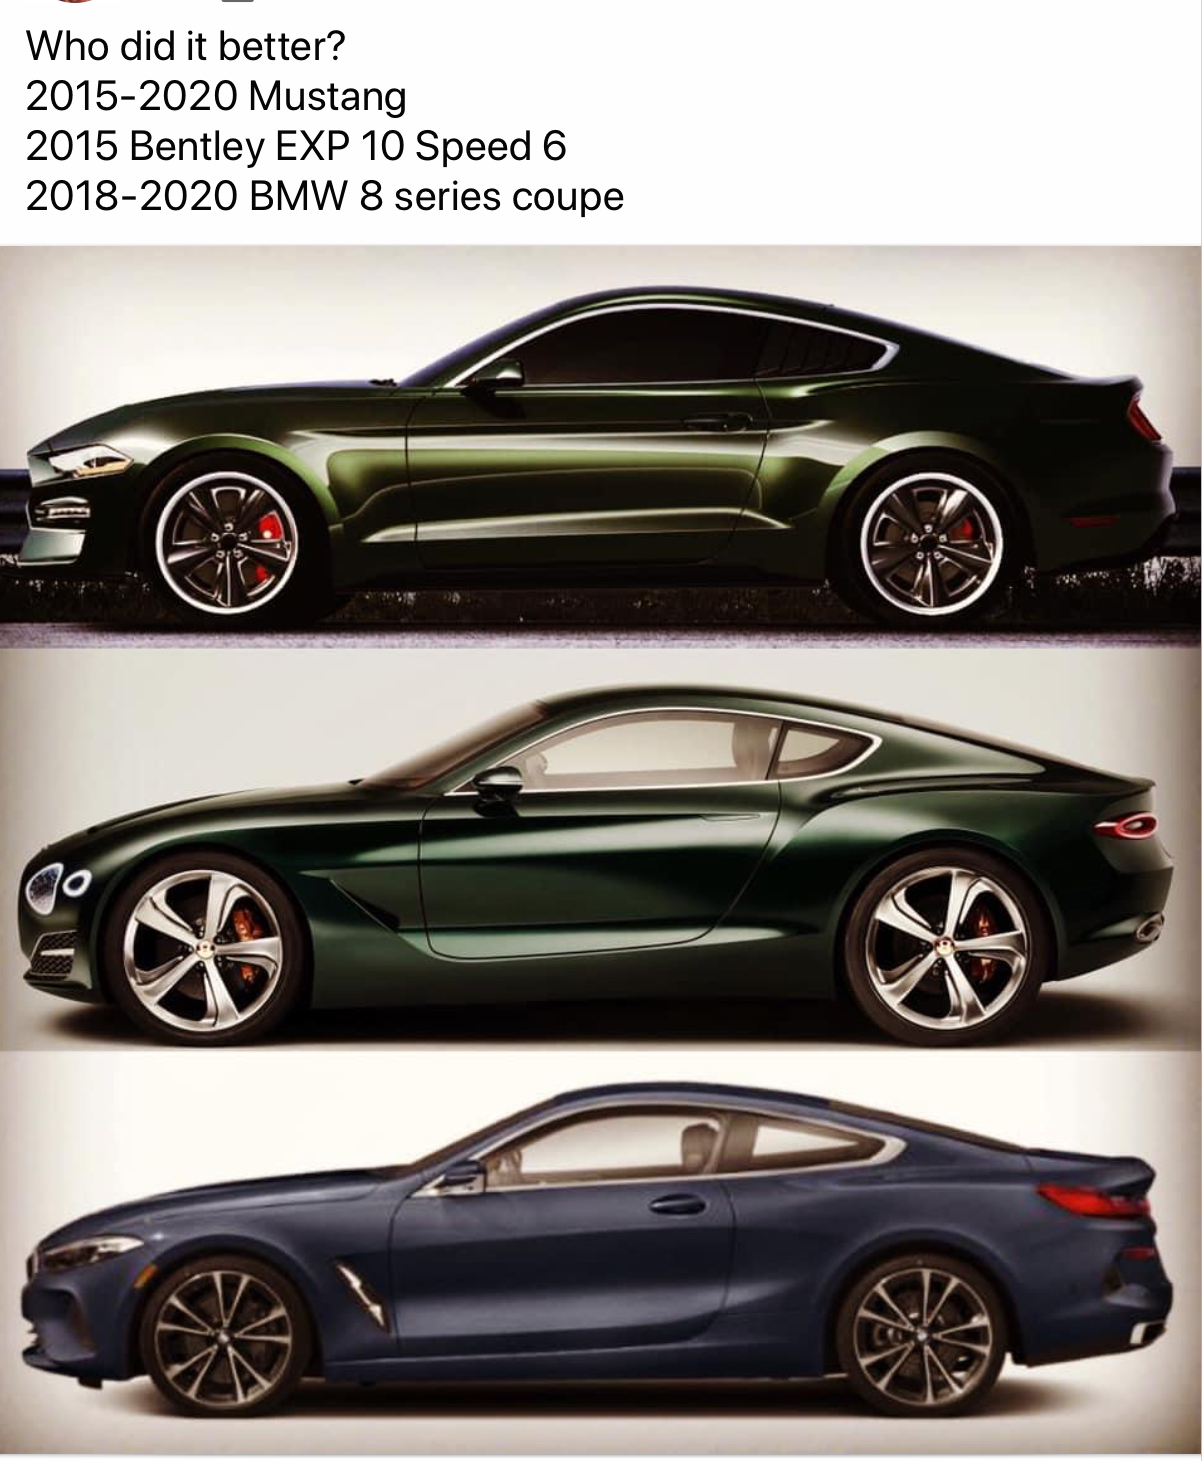 S650 Mustang Mustang S650 Design Previewed by ‘Progressive Energy In Strength’ Sculpture 531185FF-A863-497A-9349-881D6AA8A5A3